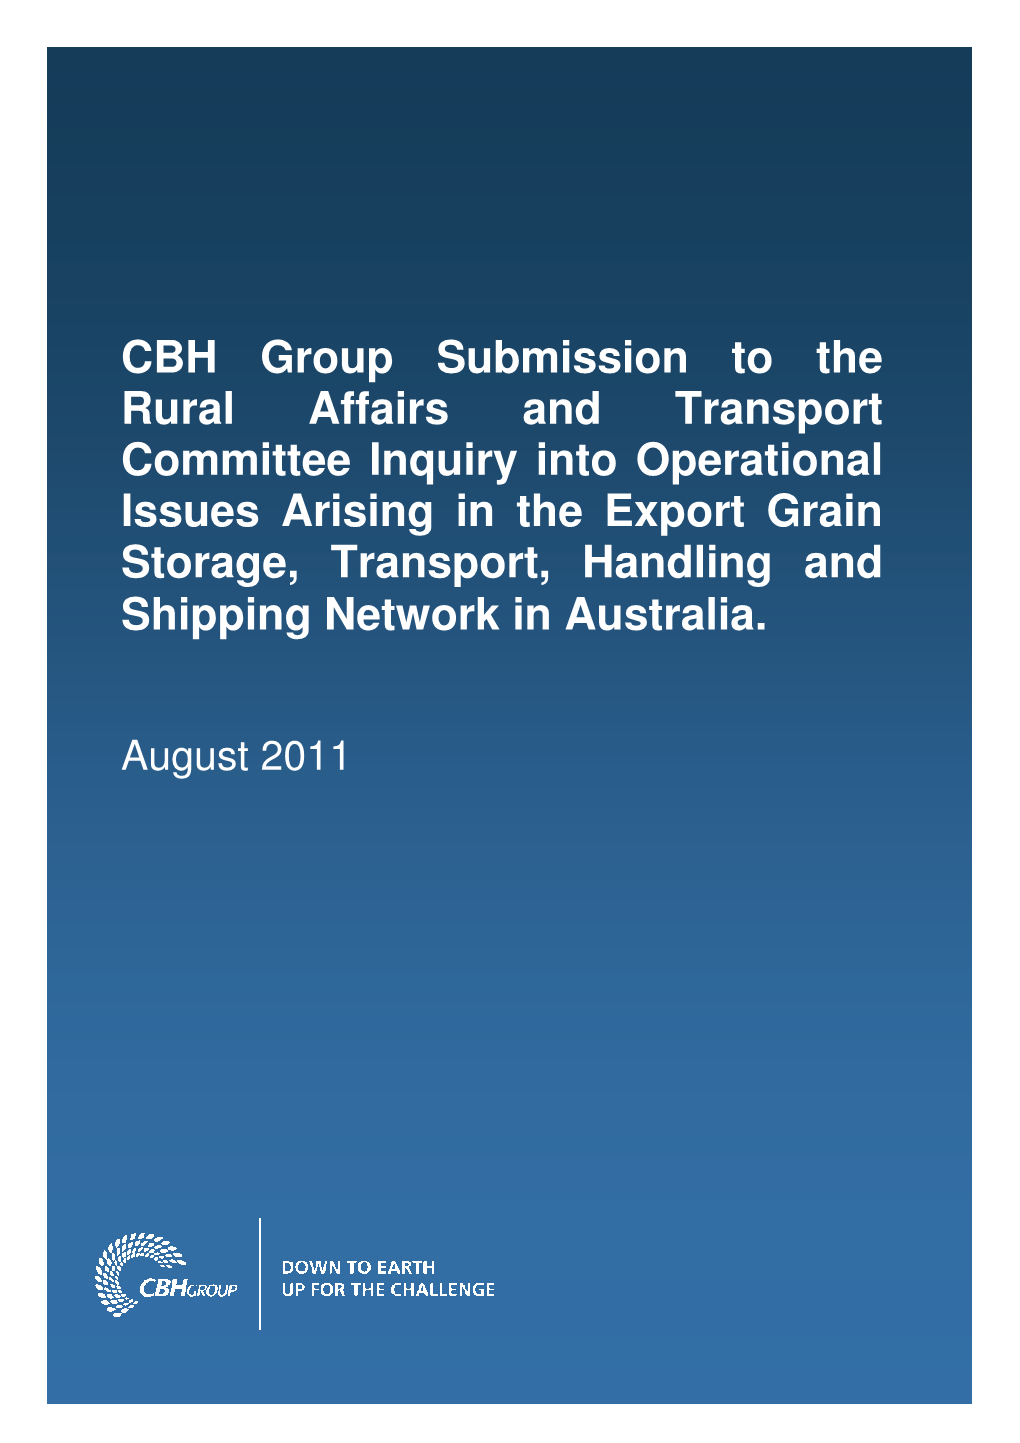 CBH Group Submission to the Rural Affairs and Transport Committee Inquiry Into Operational Issues Arising in the Export Grain St